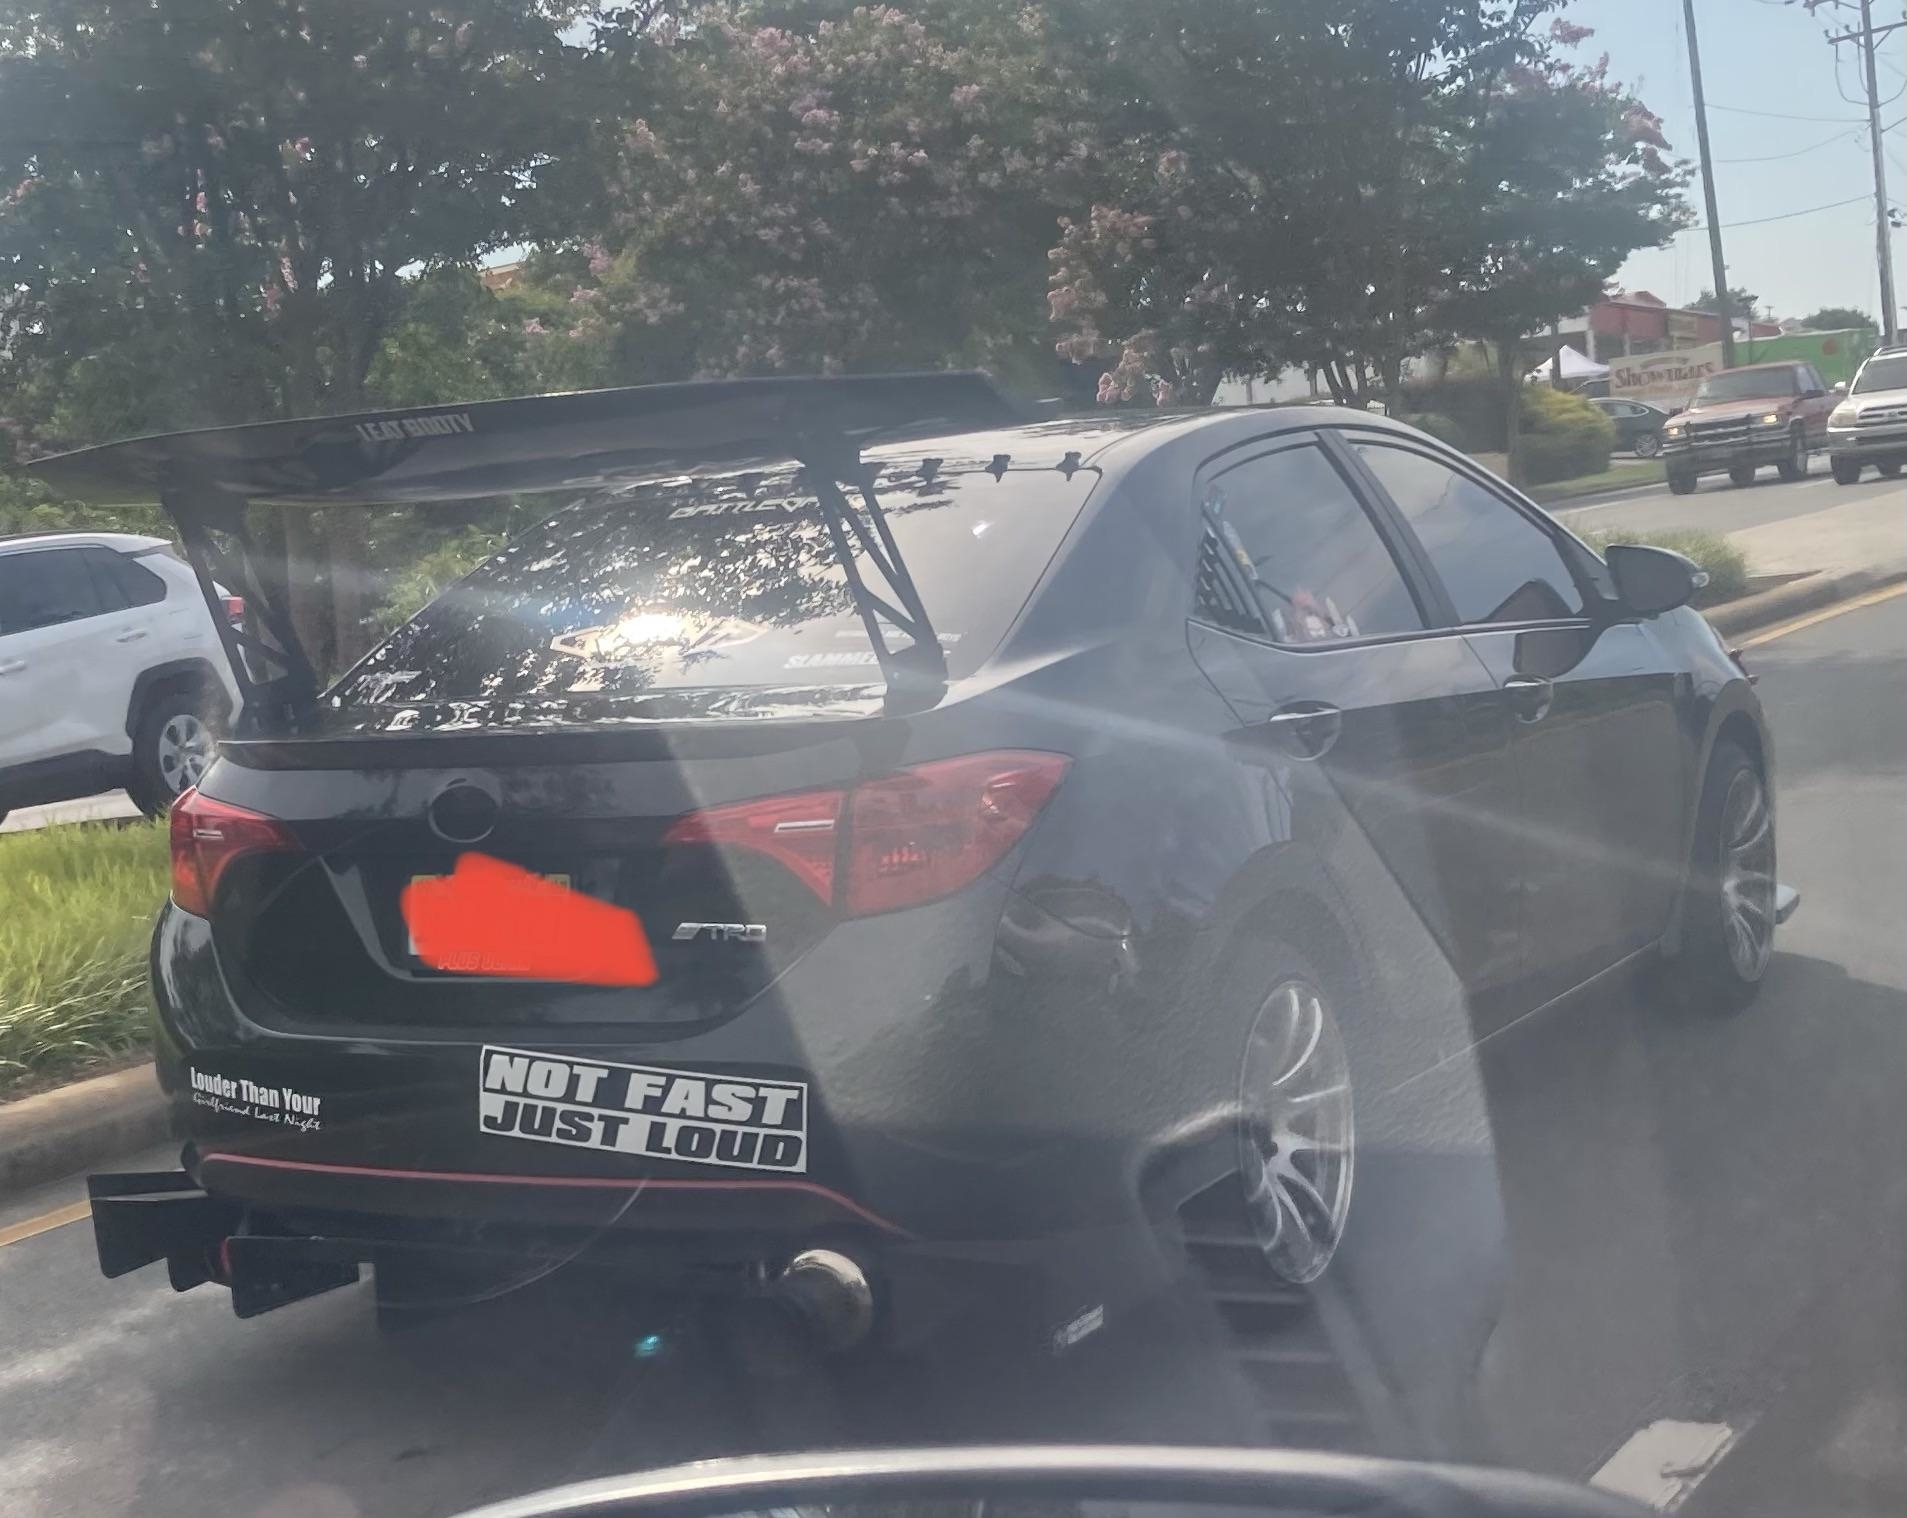 A Toyota car with a bumper sticker that says &quot;Not fast just loud&quot;